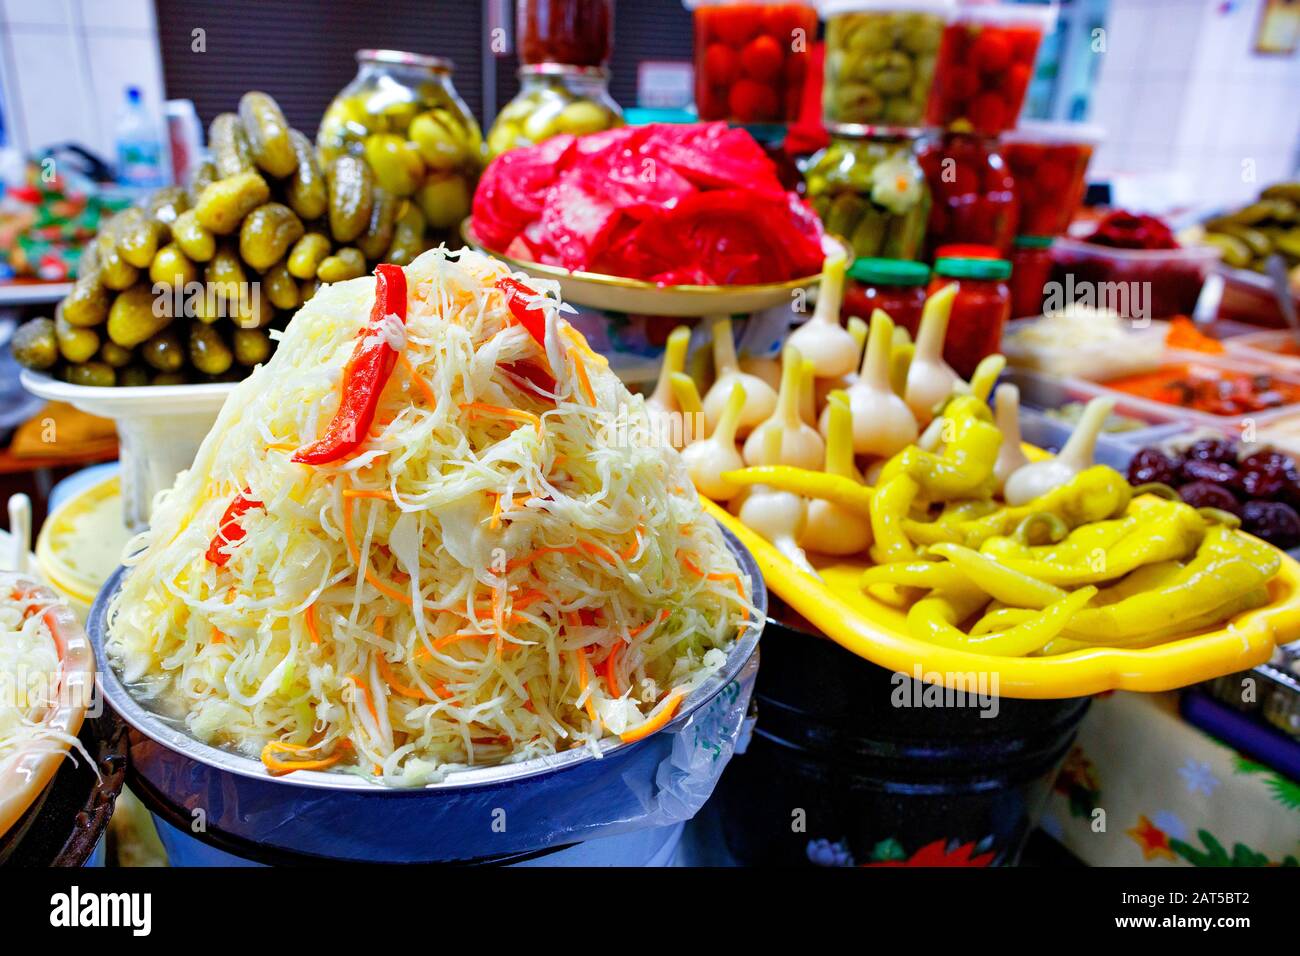 Pickled vegetables, hill salad with sauerkraut, carrots and sweet peppers on the background of other fermented vegetables in the blur. Stock Photo